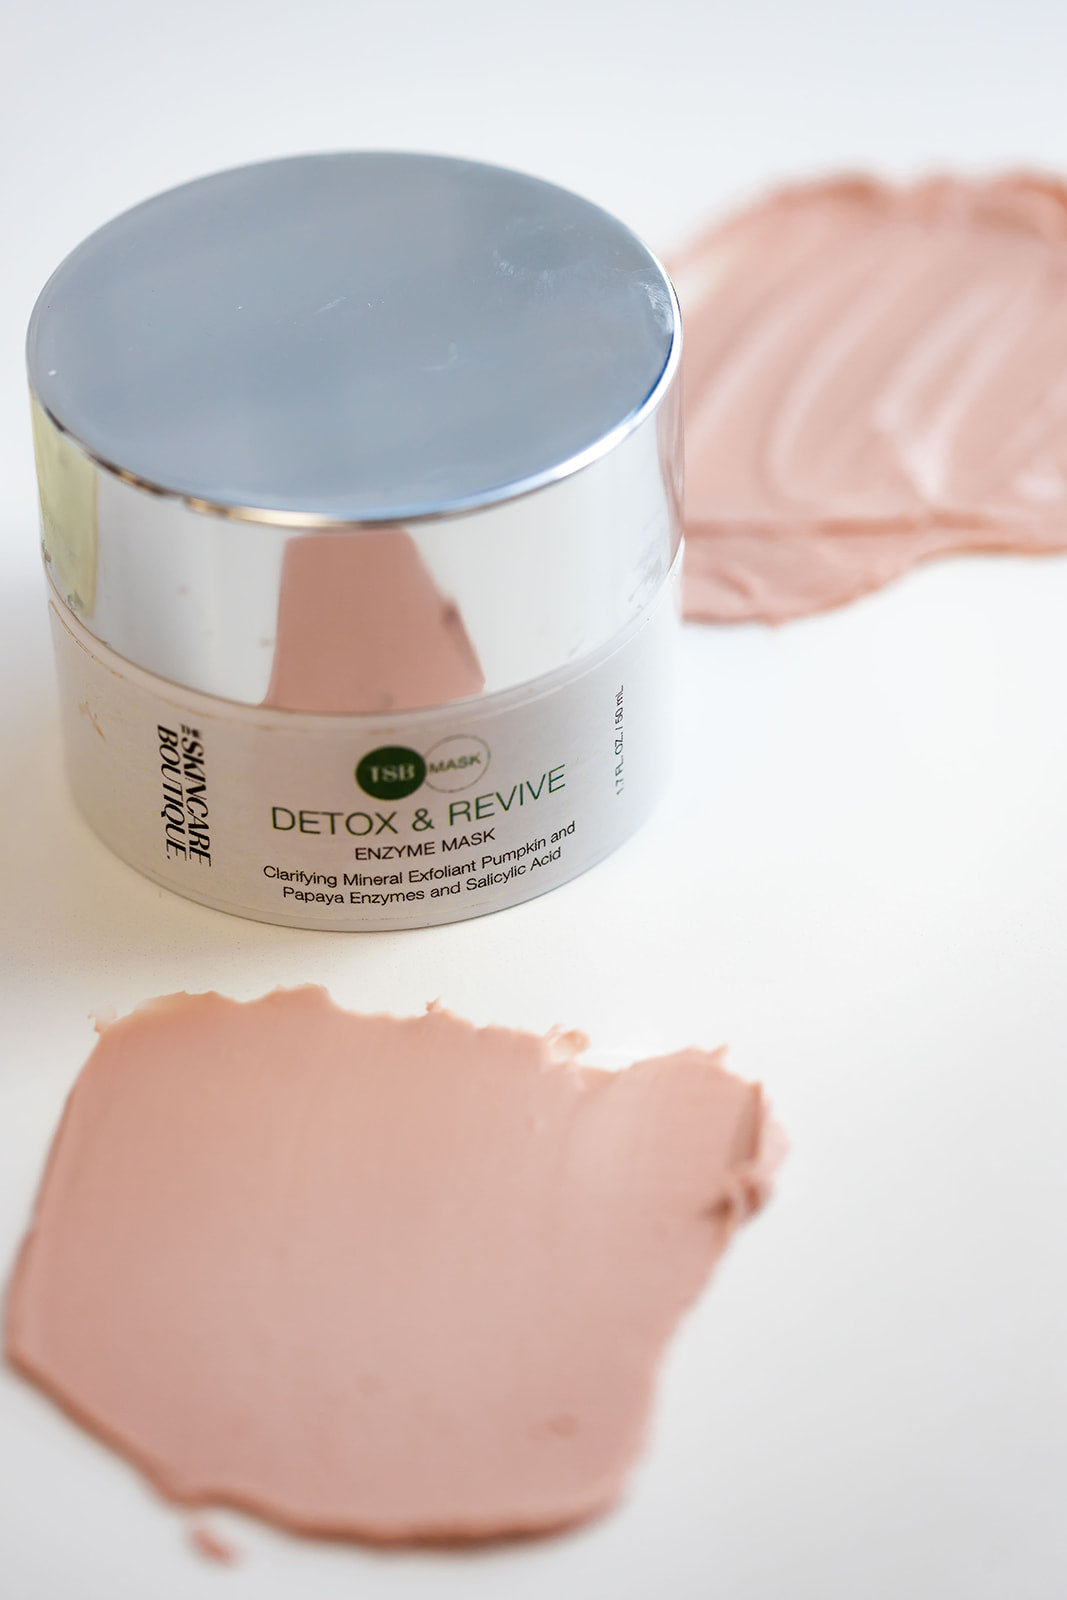 DETOX AND REVIVE ENZYME MASK